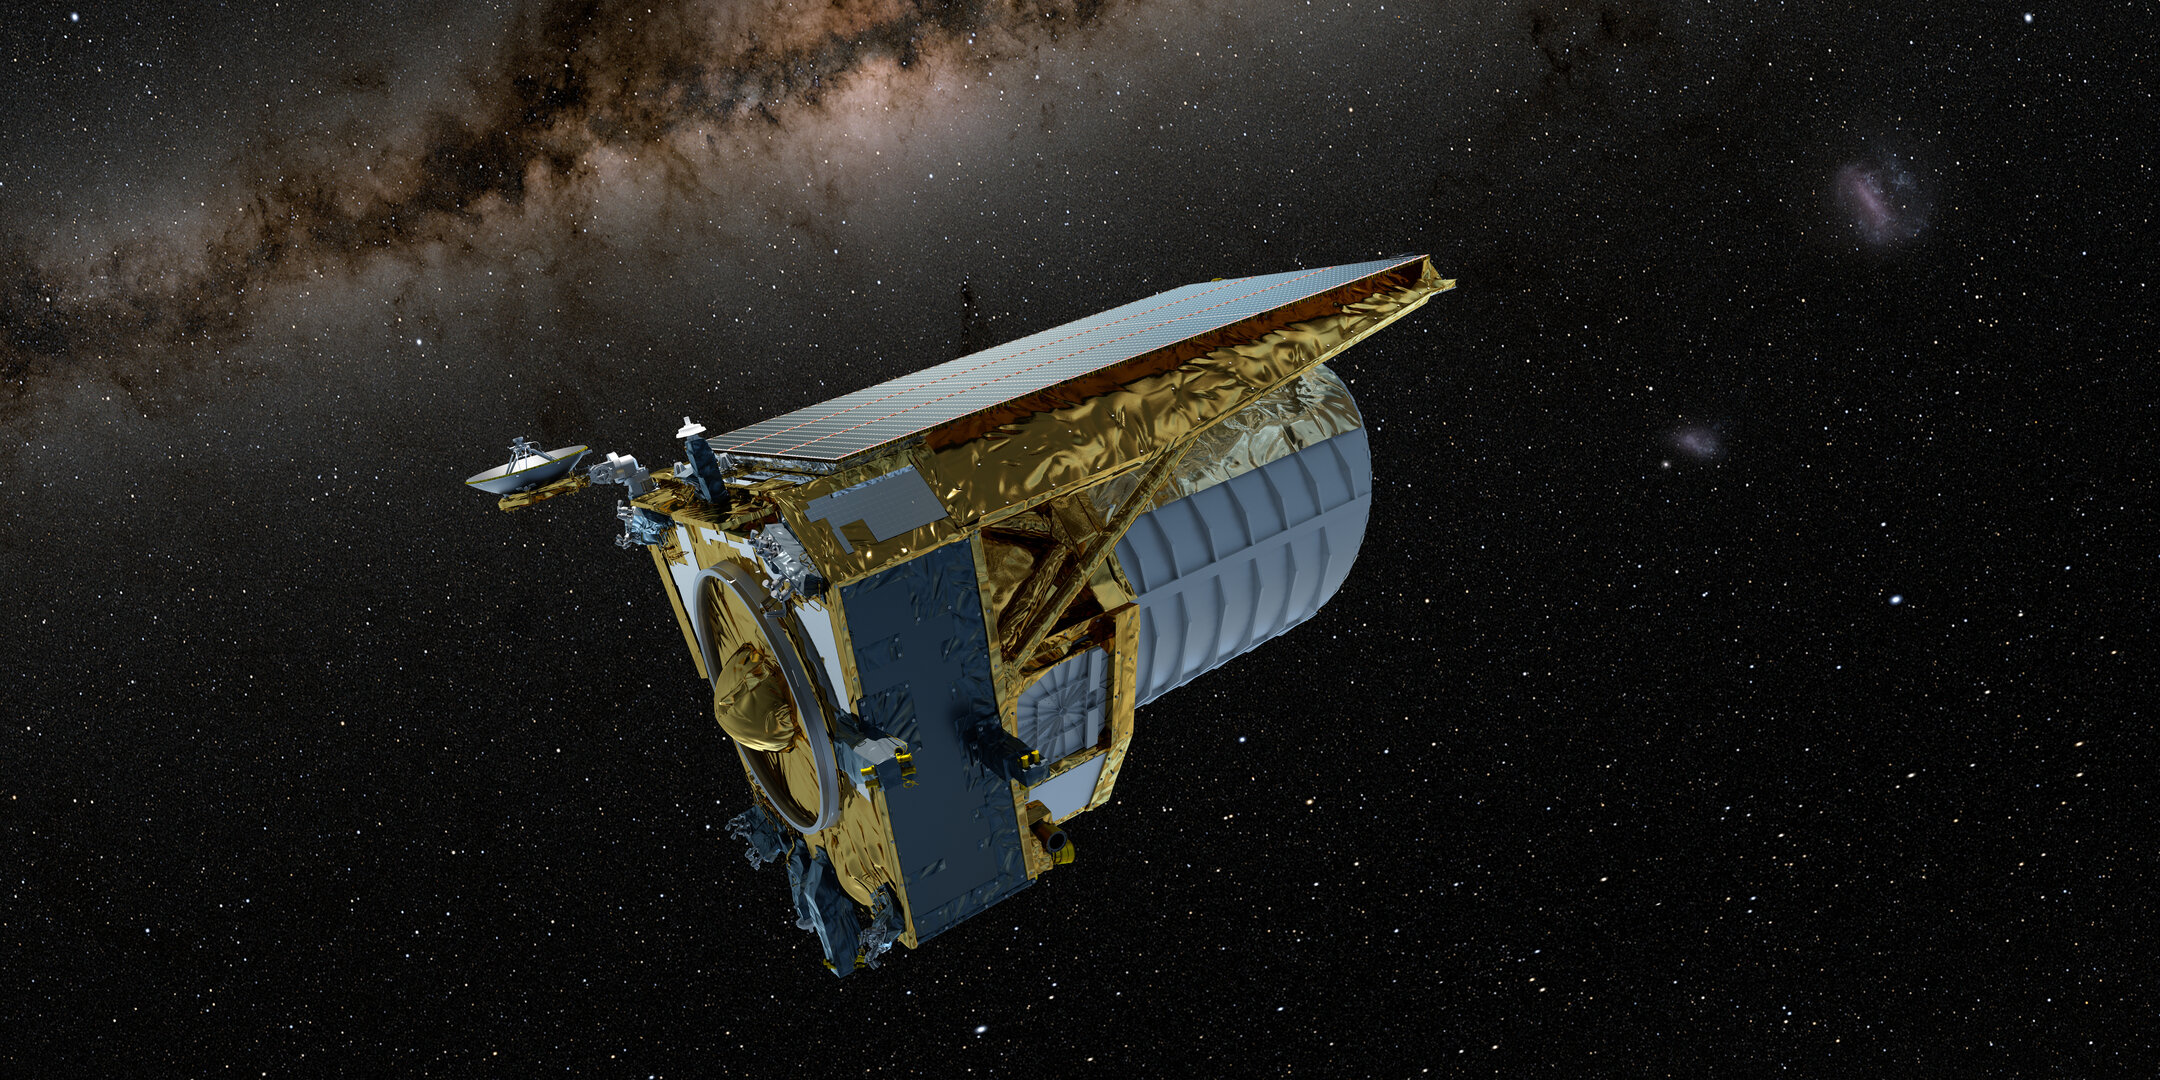 The view of the new European Space Telescope was damaged, then restored